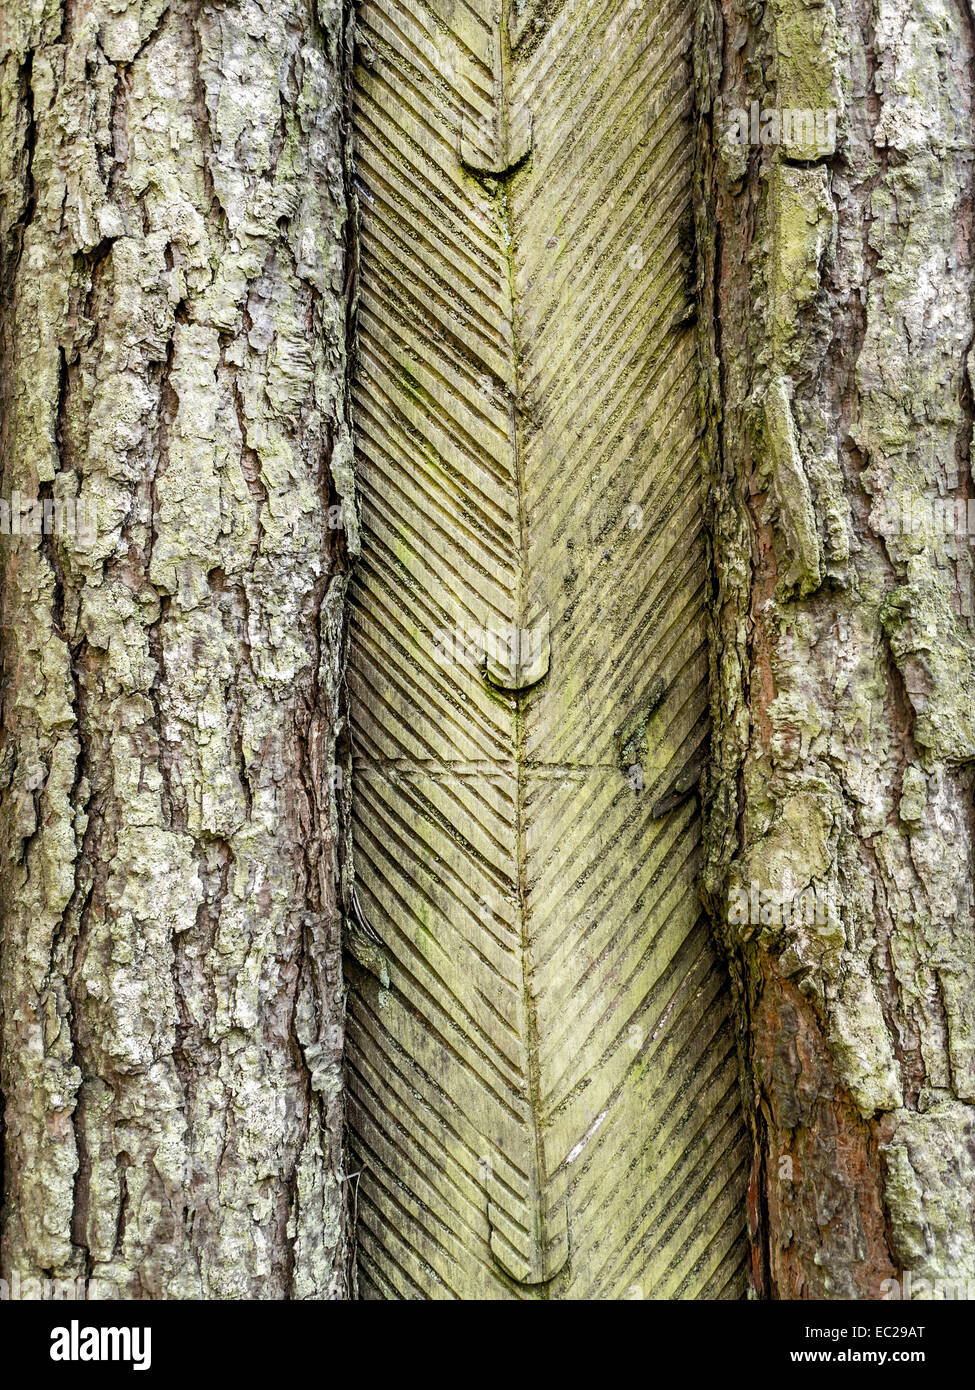 Closeup of pine tree trunk with resing incising Stock Photo